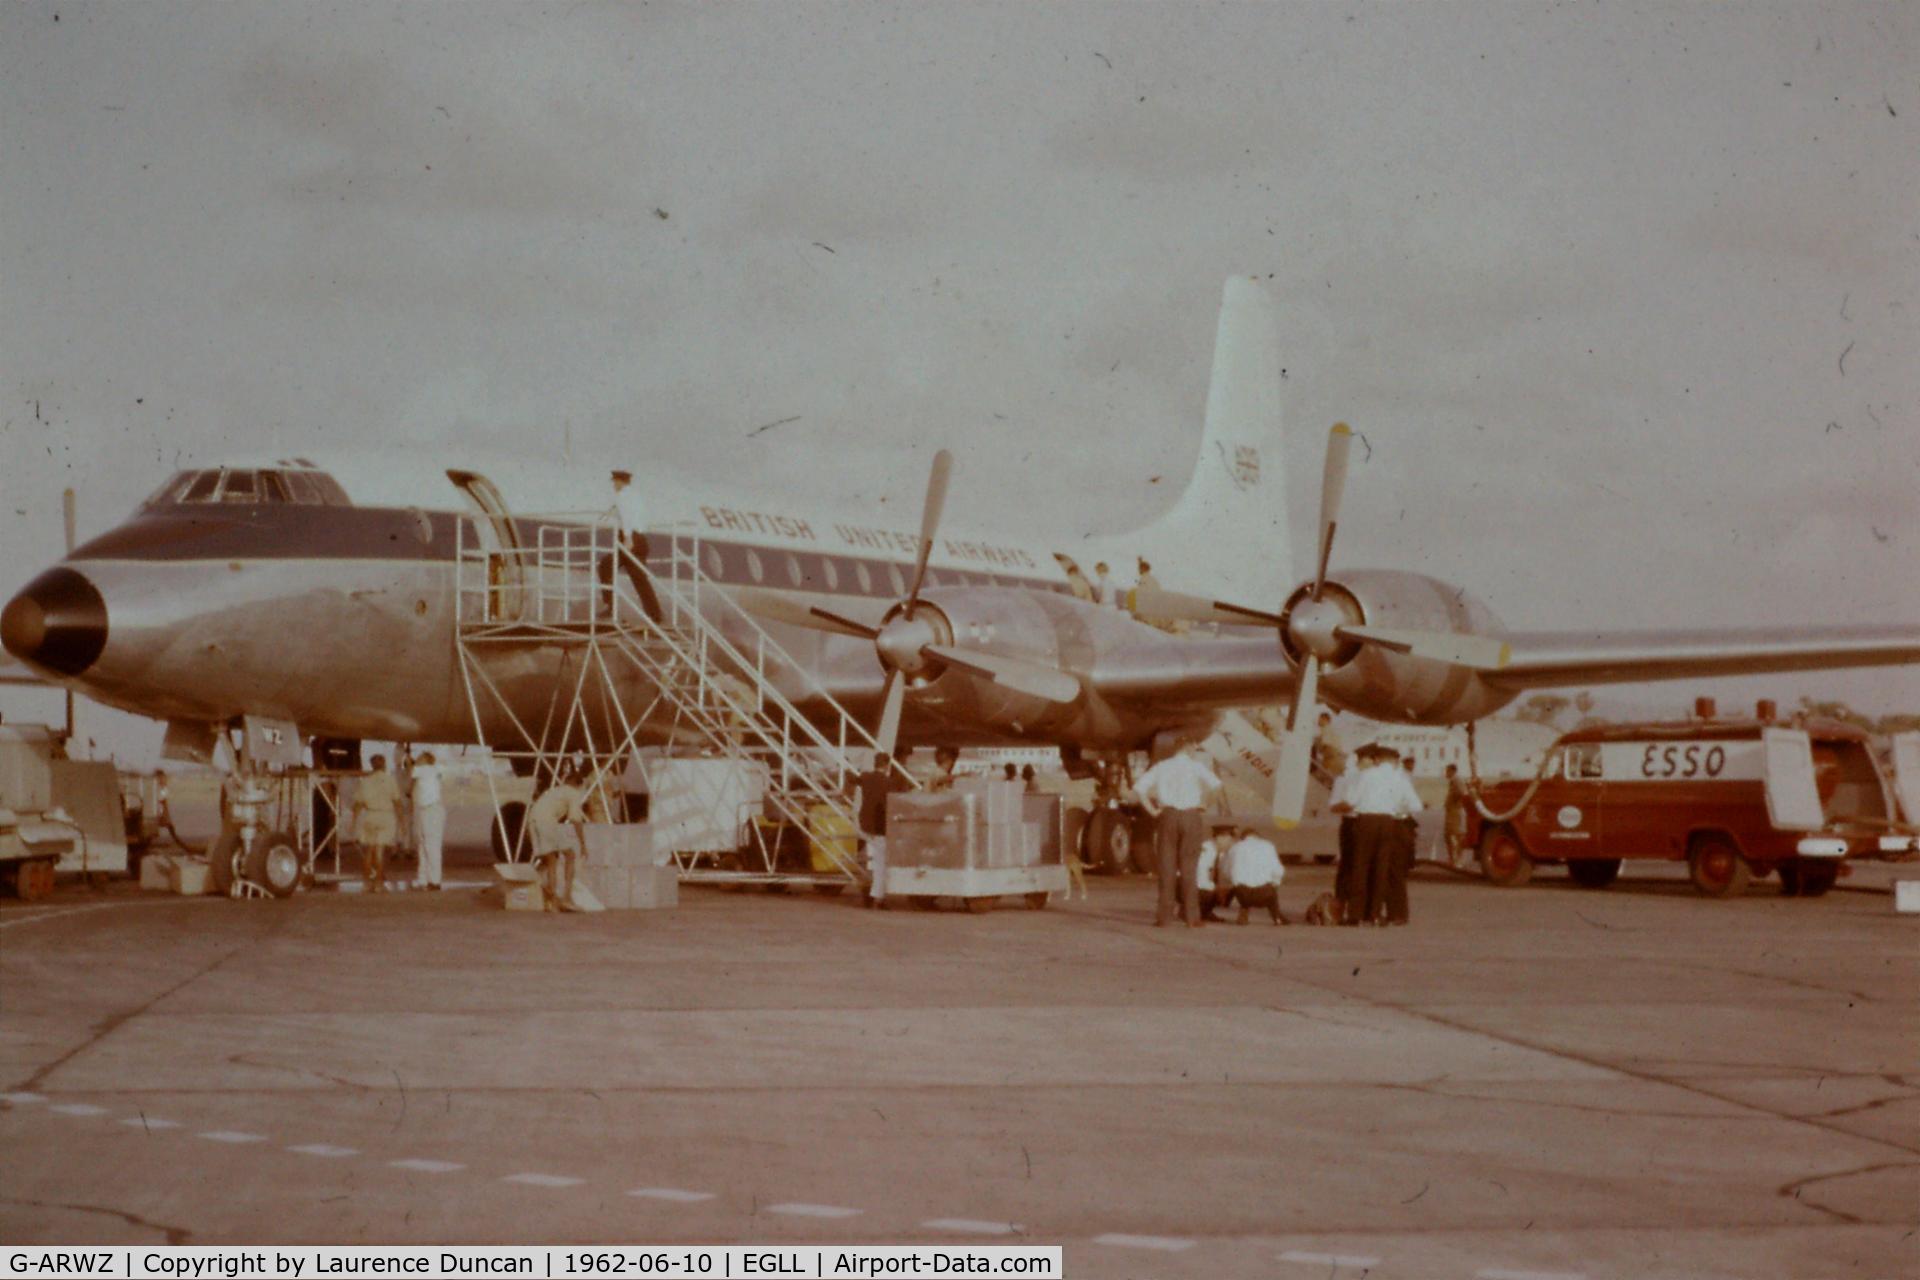 G-ARWZ, 1957 Bristol 175 Britannia 313 C/N 13233, My father recently passed away and I am converting his slides to digital images. My mum, dad and sister flew back from duty for the RAF in 1962 aboard this aircraft.